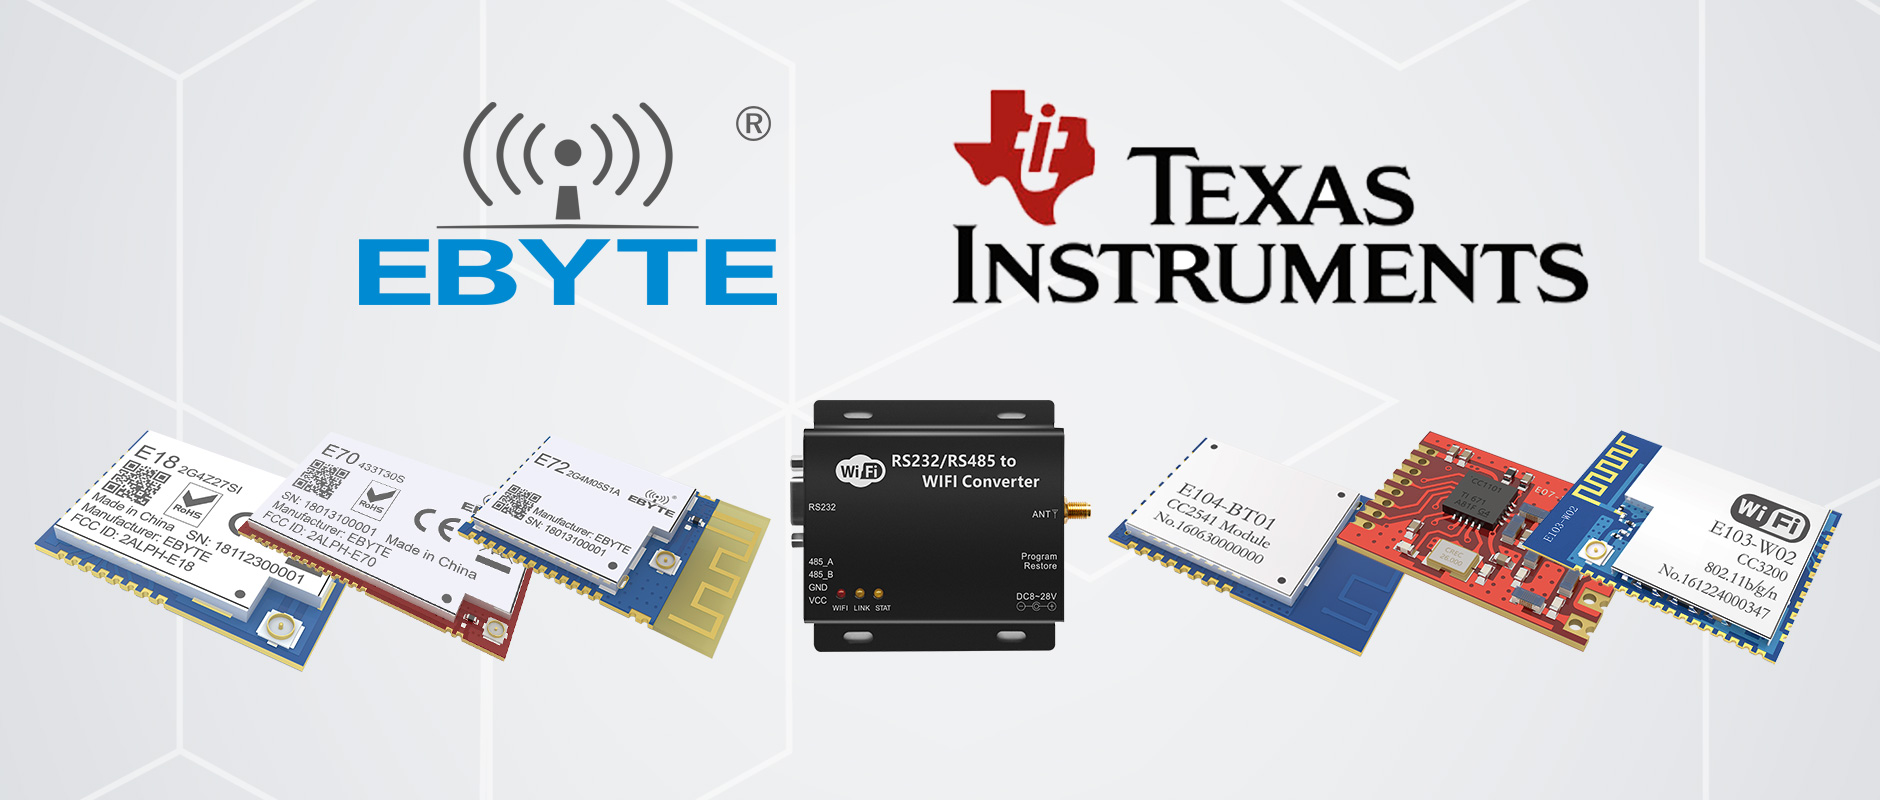 Ebyte became the third-party design partner with Texas Instruments (TI)